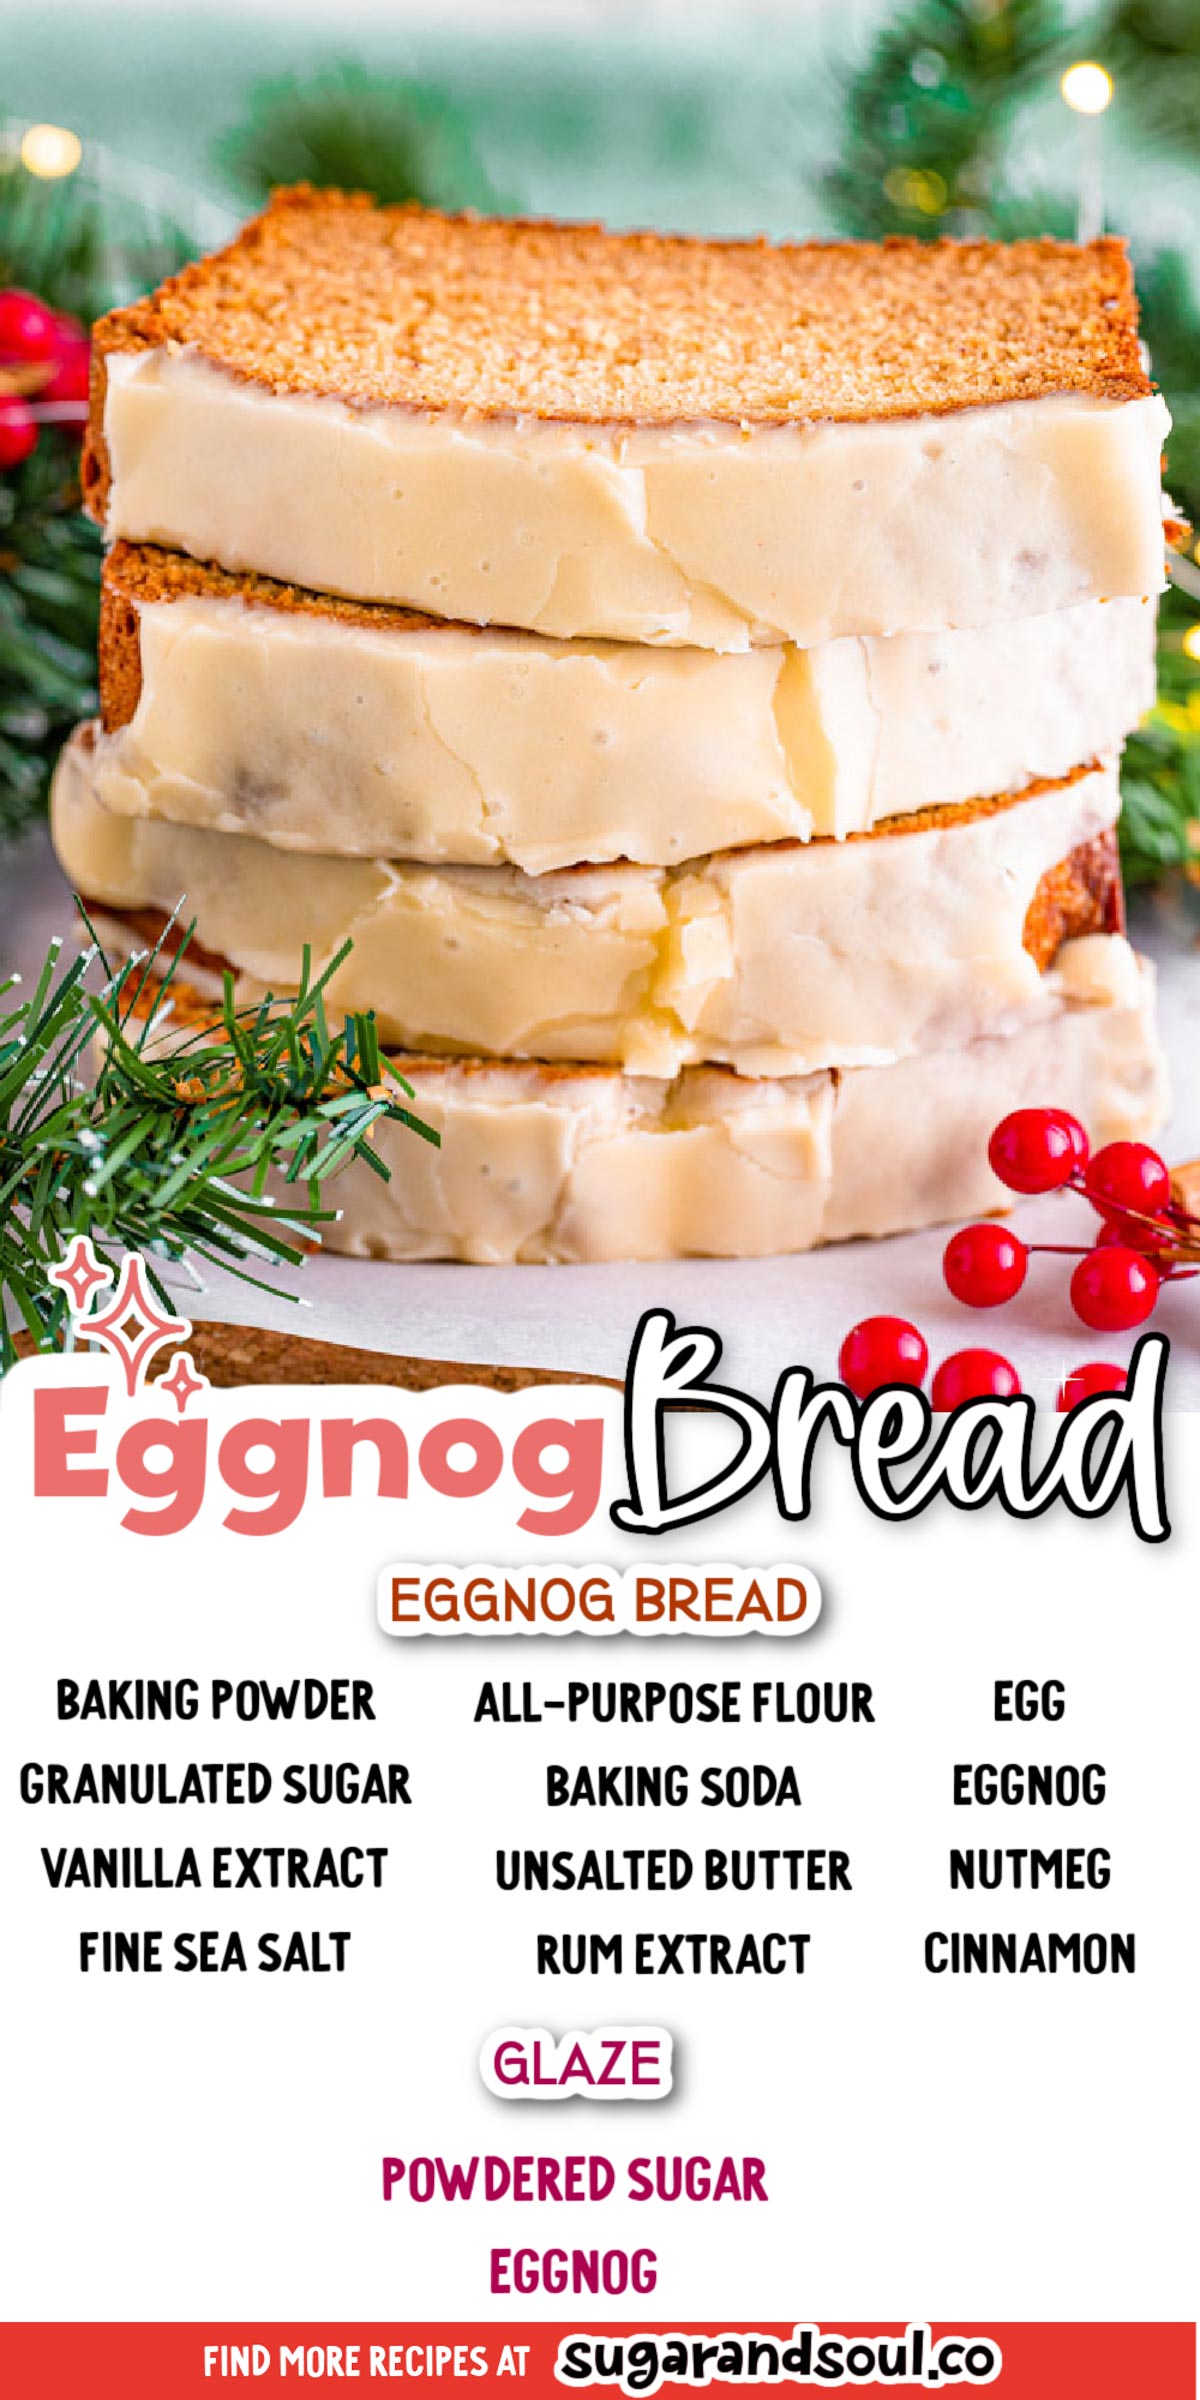 This Eggnog Bread is a perfectly moist and tender, easy quick bread recipe that gets finished off with a 2-ingredient sweet eggnog glaze! An easy-to-make dessert that's great to enjoy at those wintertime holiday gatherings! via @sugarandsoulco